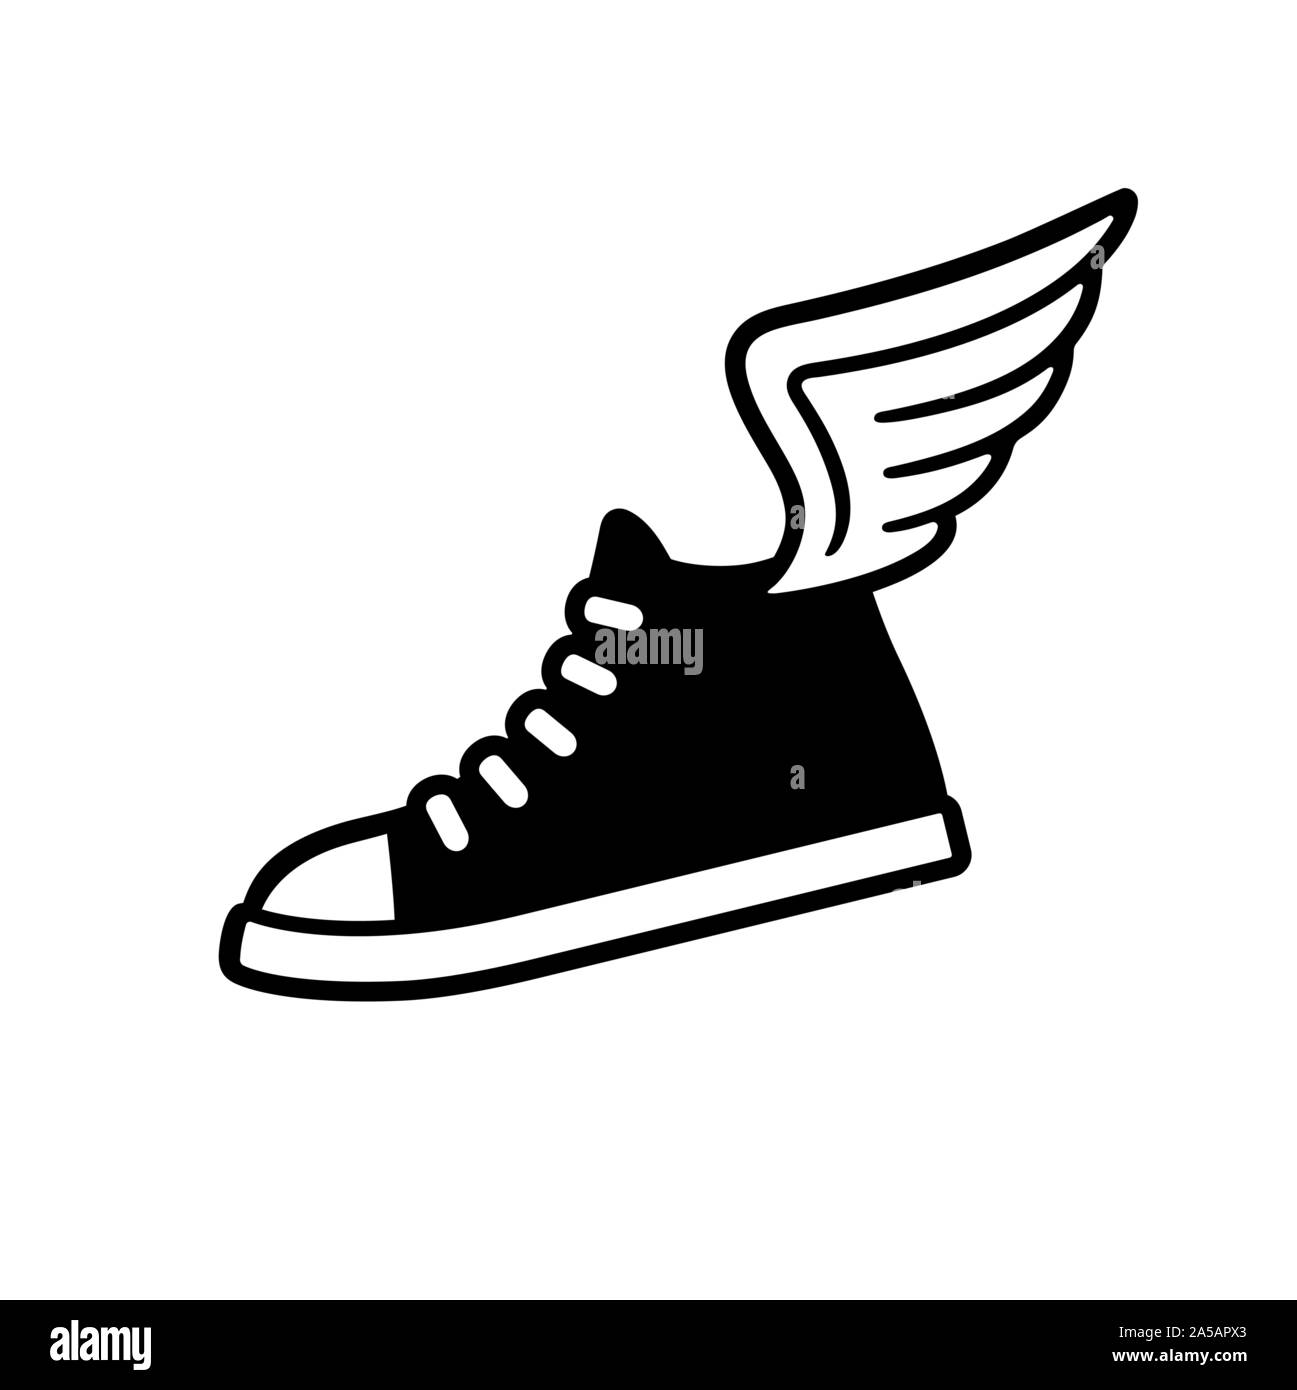 Fly shoe Cut Out Stock Images & Pictures - Alamy